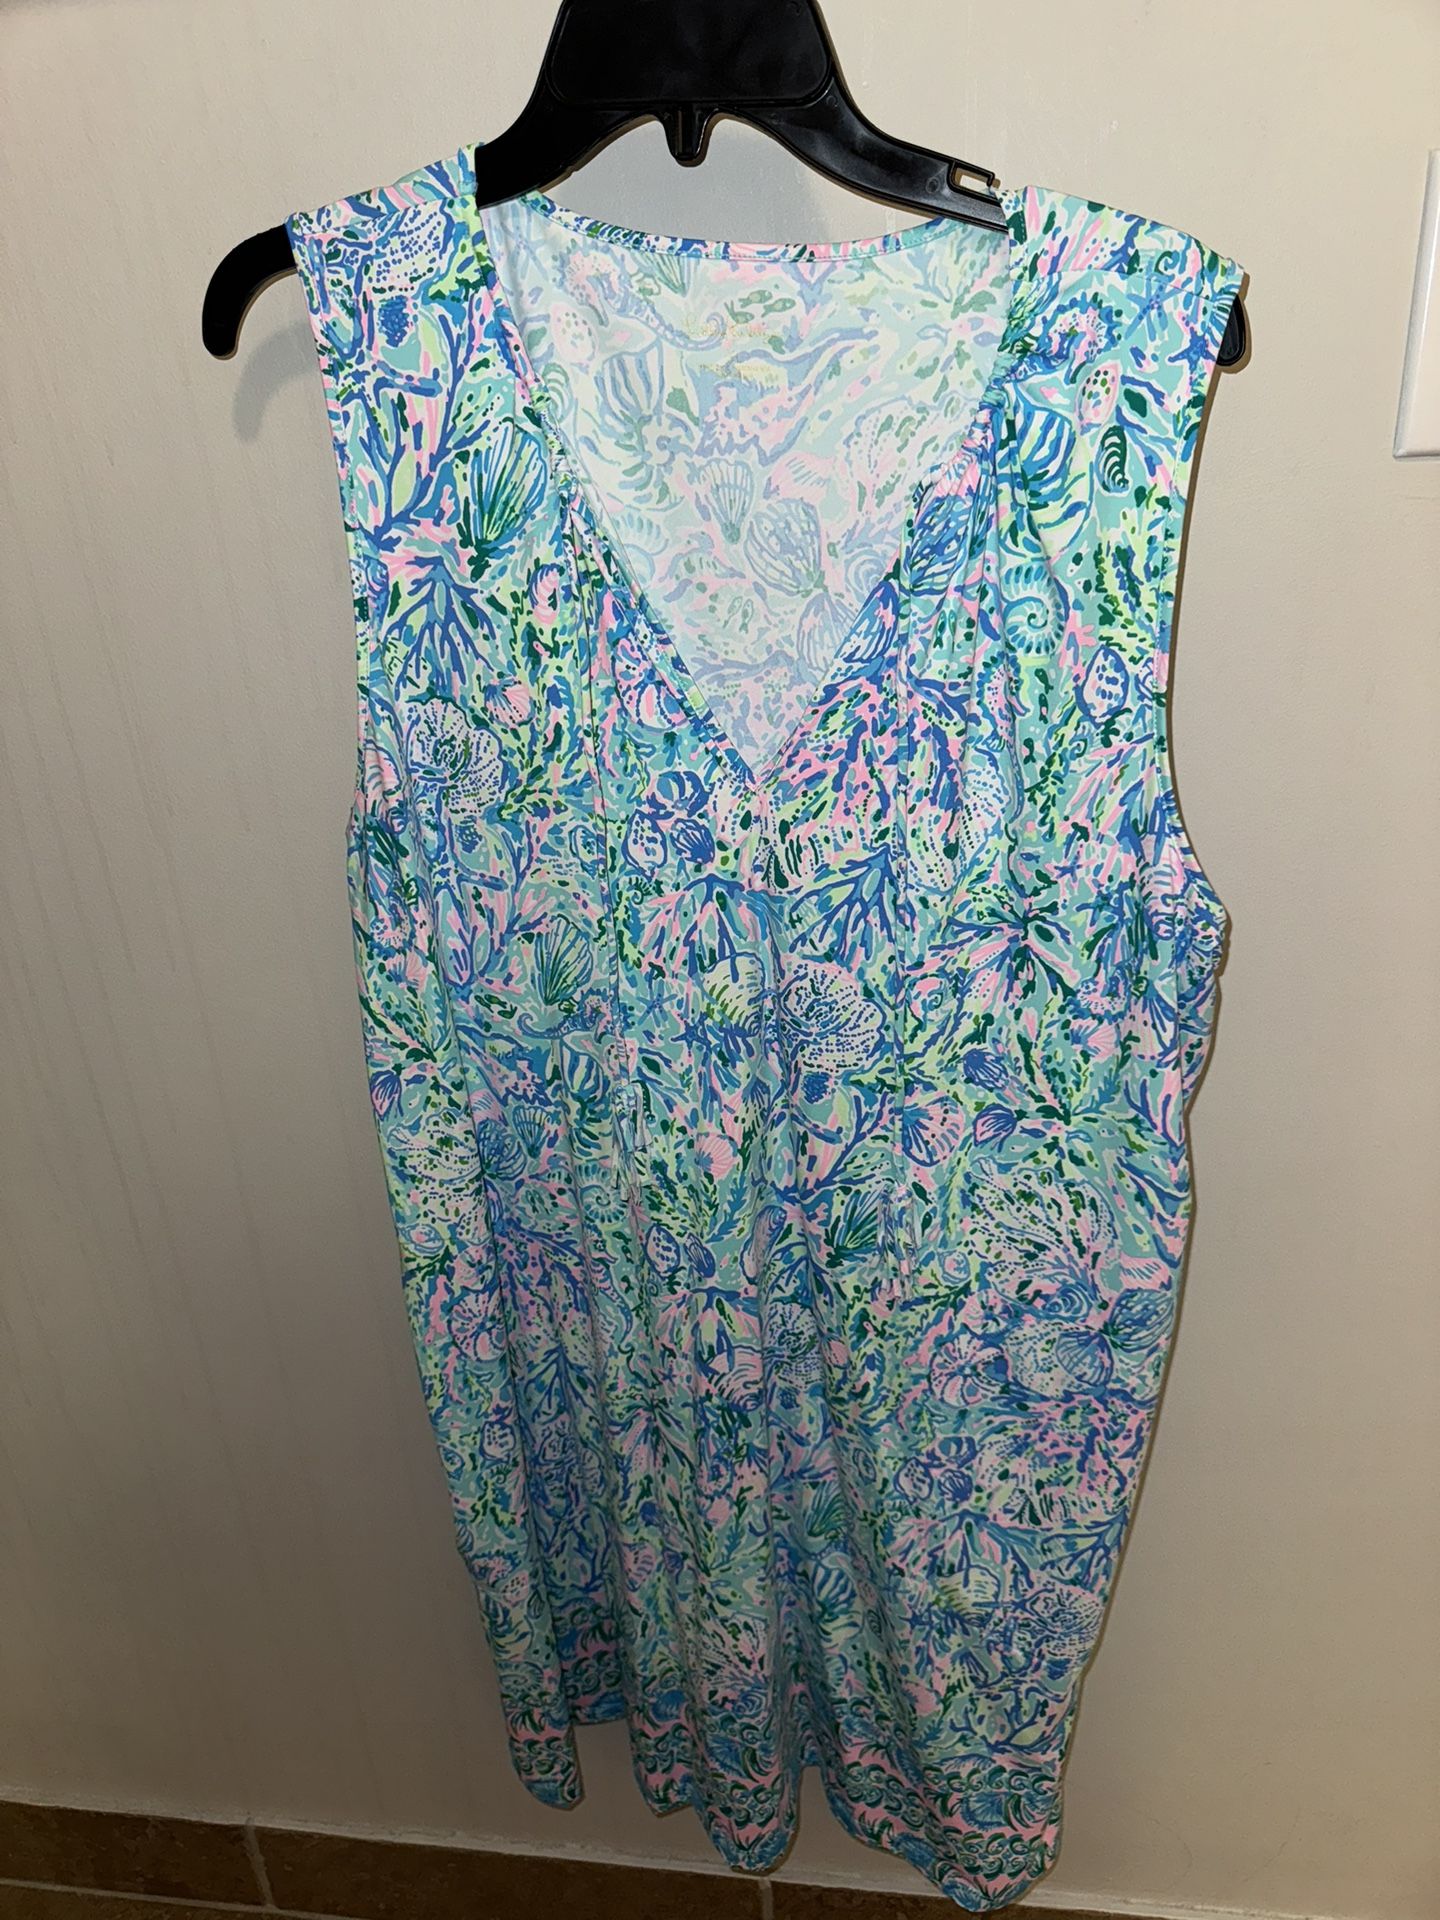 Women’s Size Large Lilly Pulitzer Cover Up